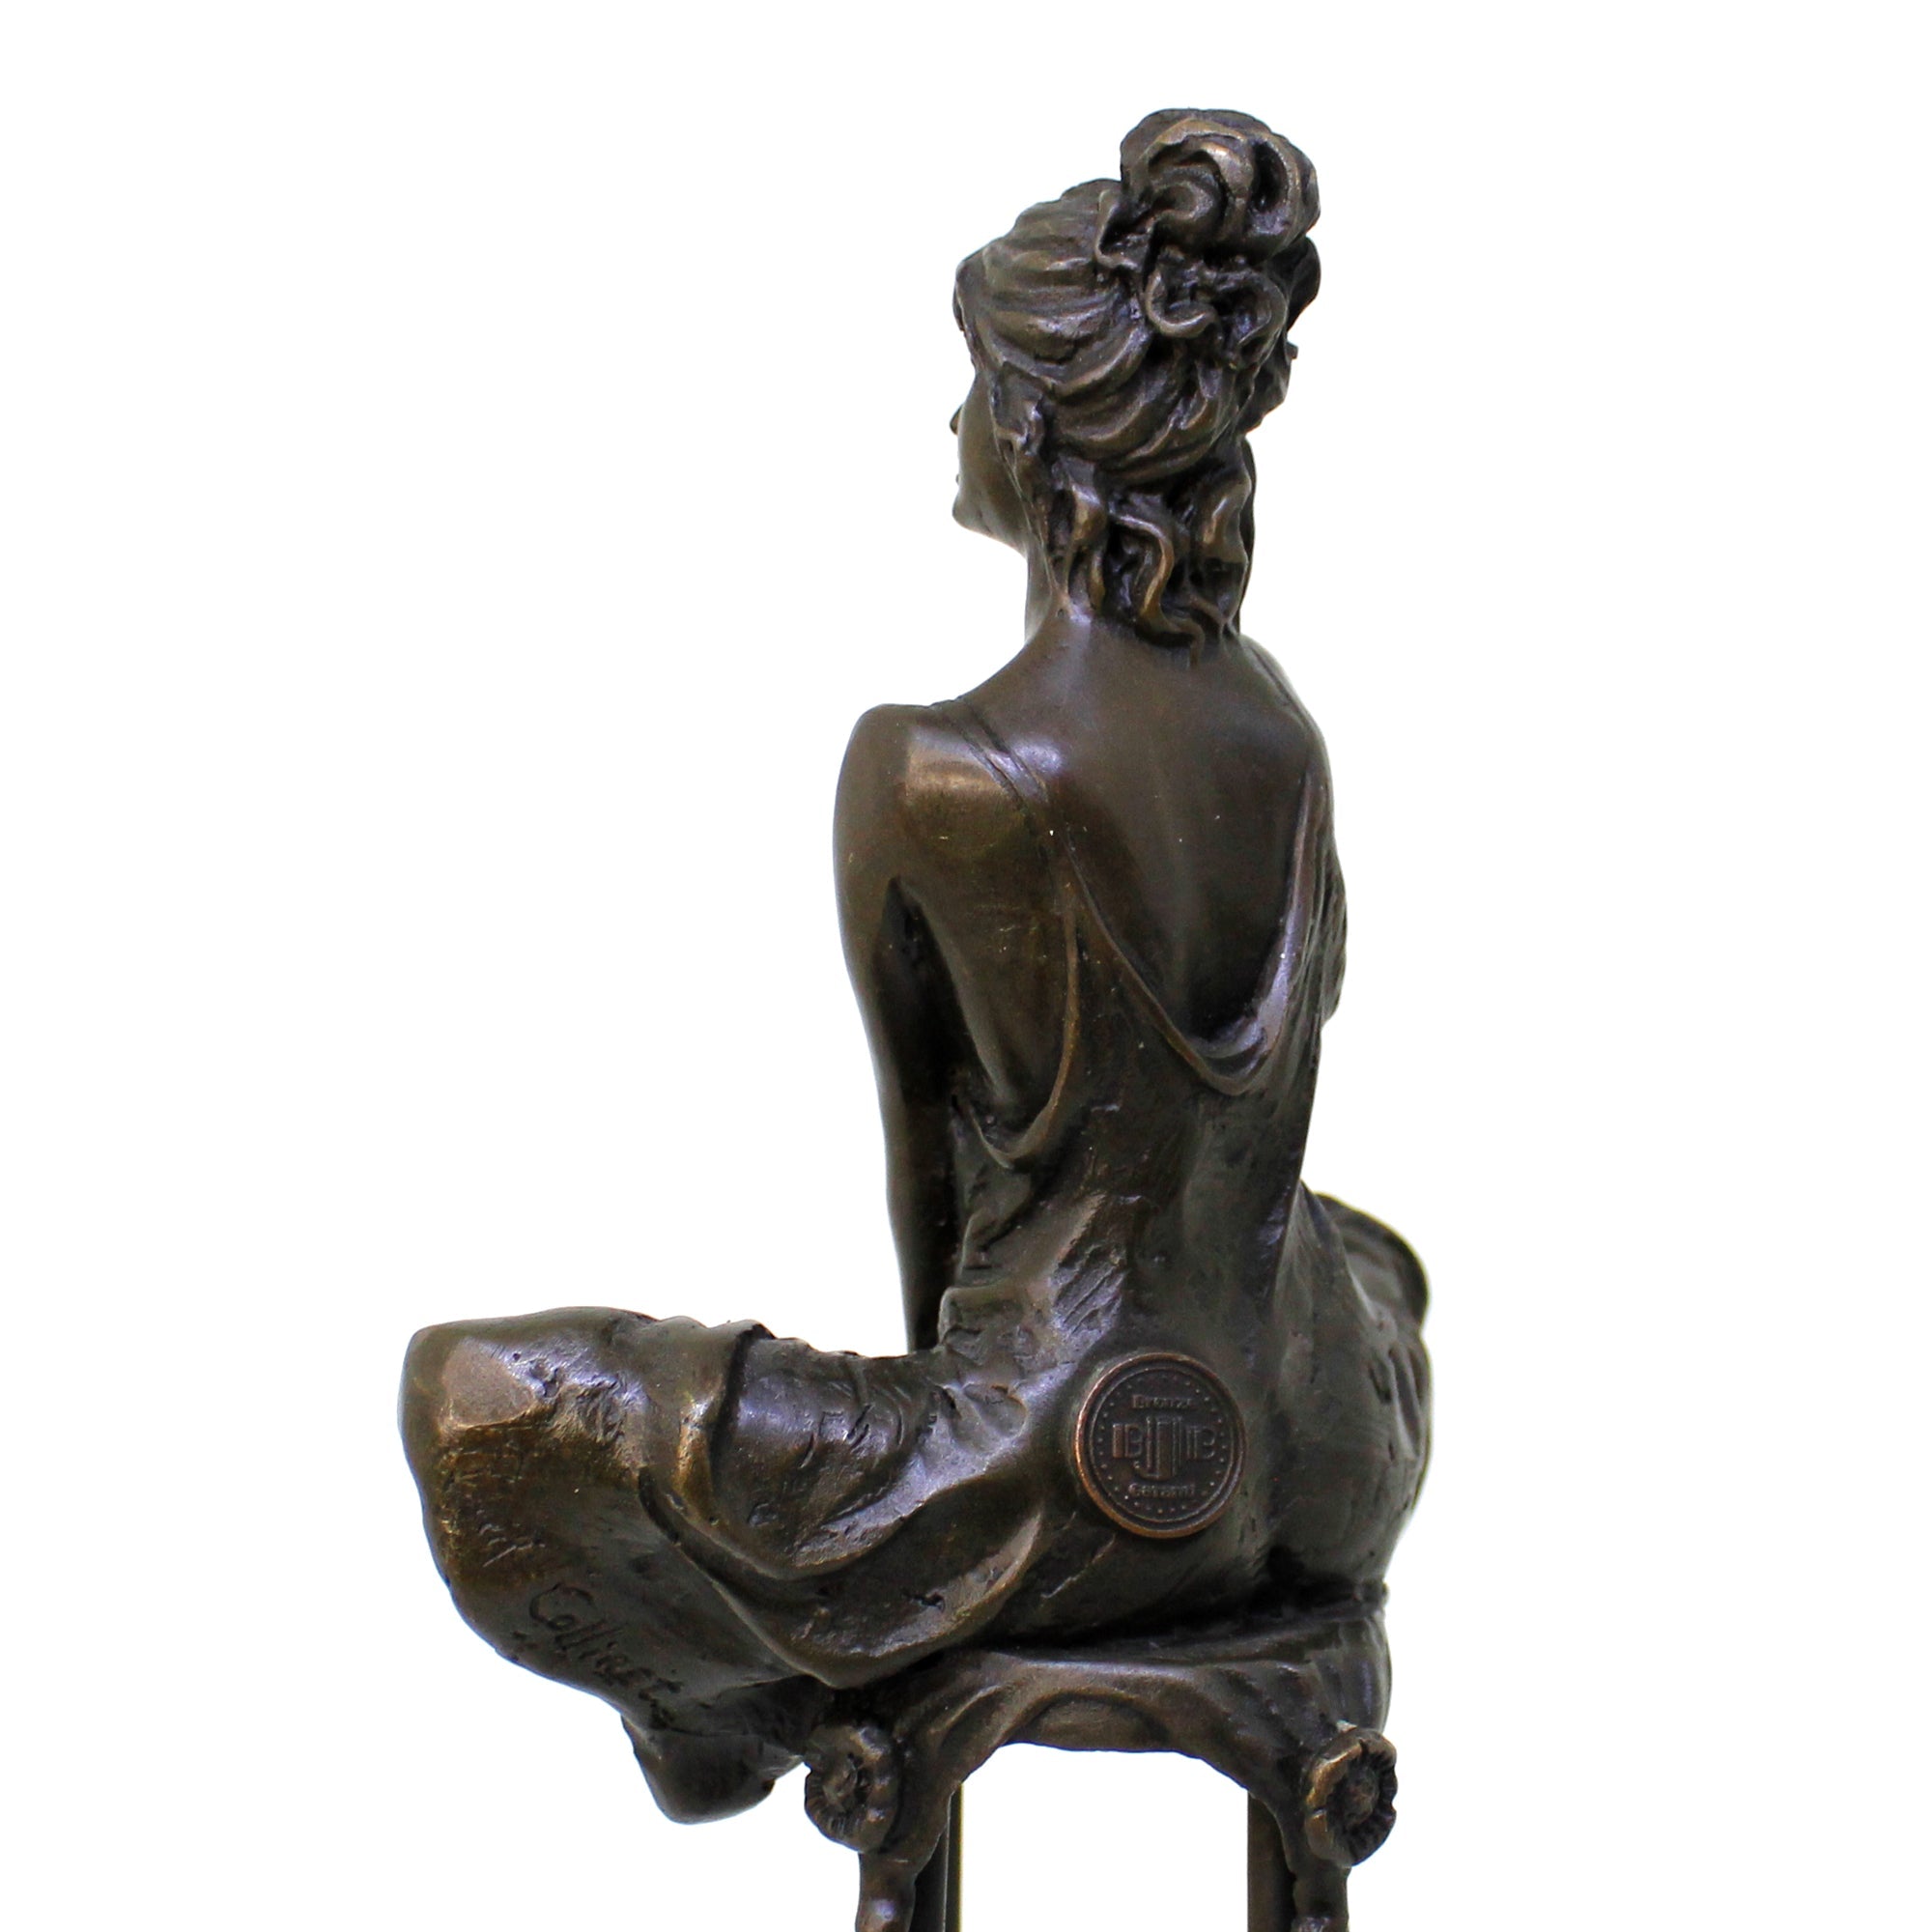 Woman on a Chair